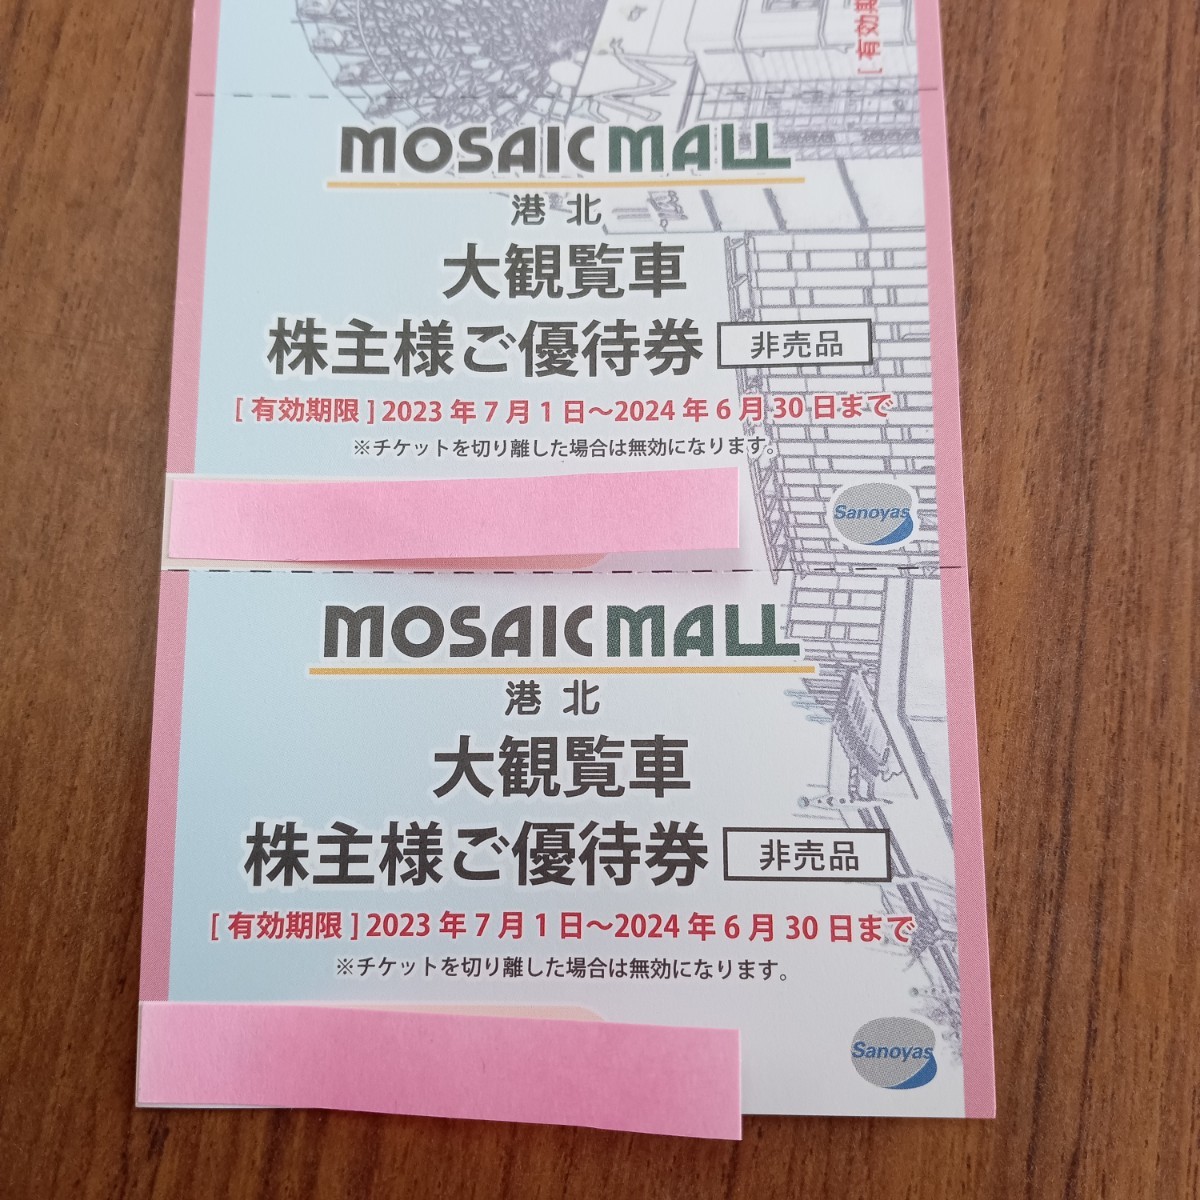  Sano yas holding s corporation stockholder complimentary ticket MOSAIC MALL Christmas illumination mo The ik molding . north large viewing car passenger ticket have efficacy time limit :2024/6/30